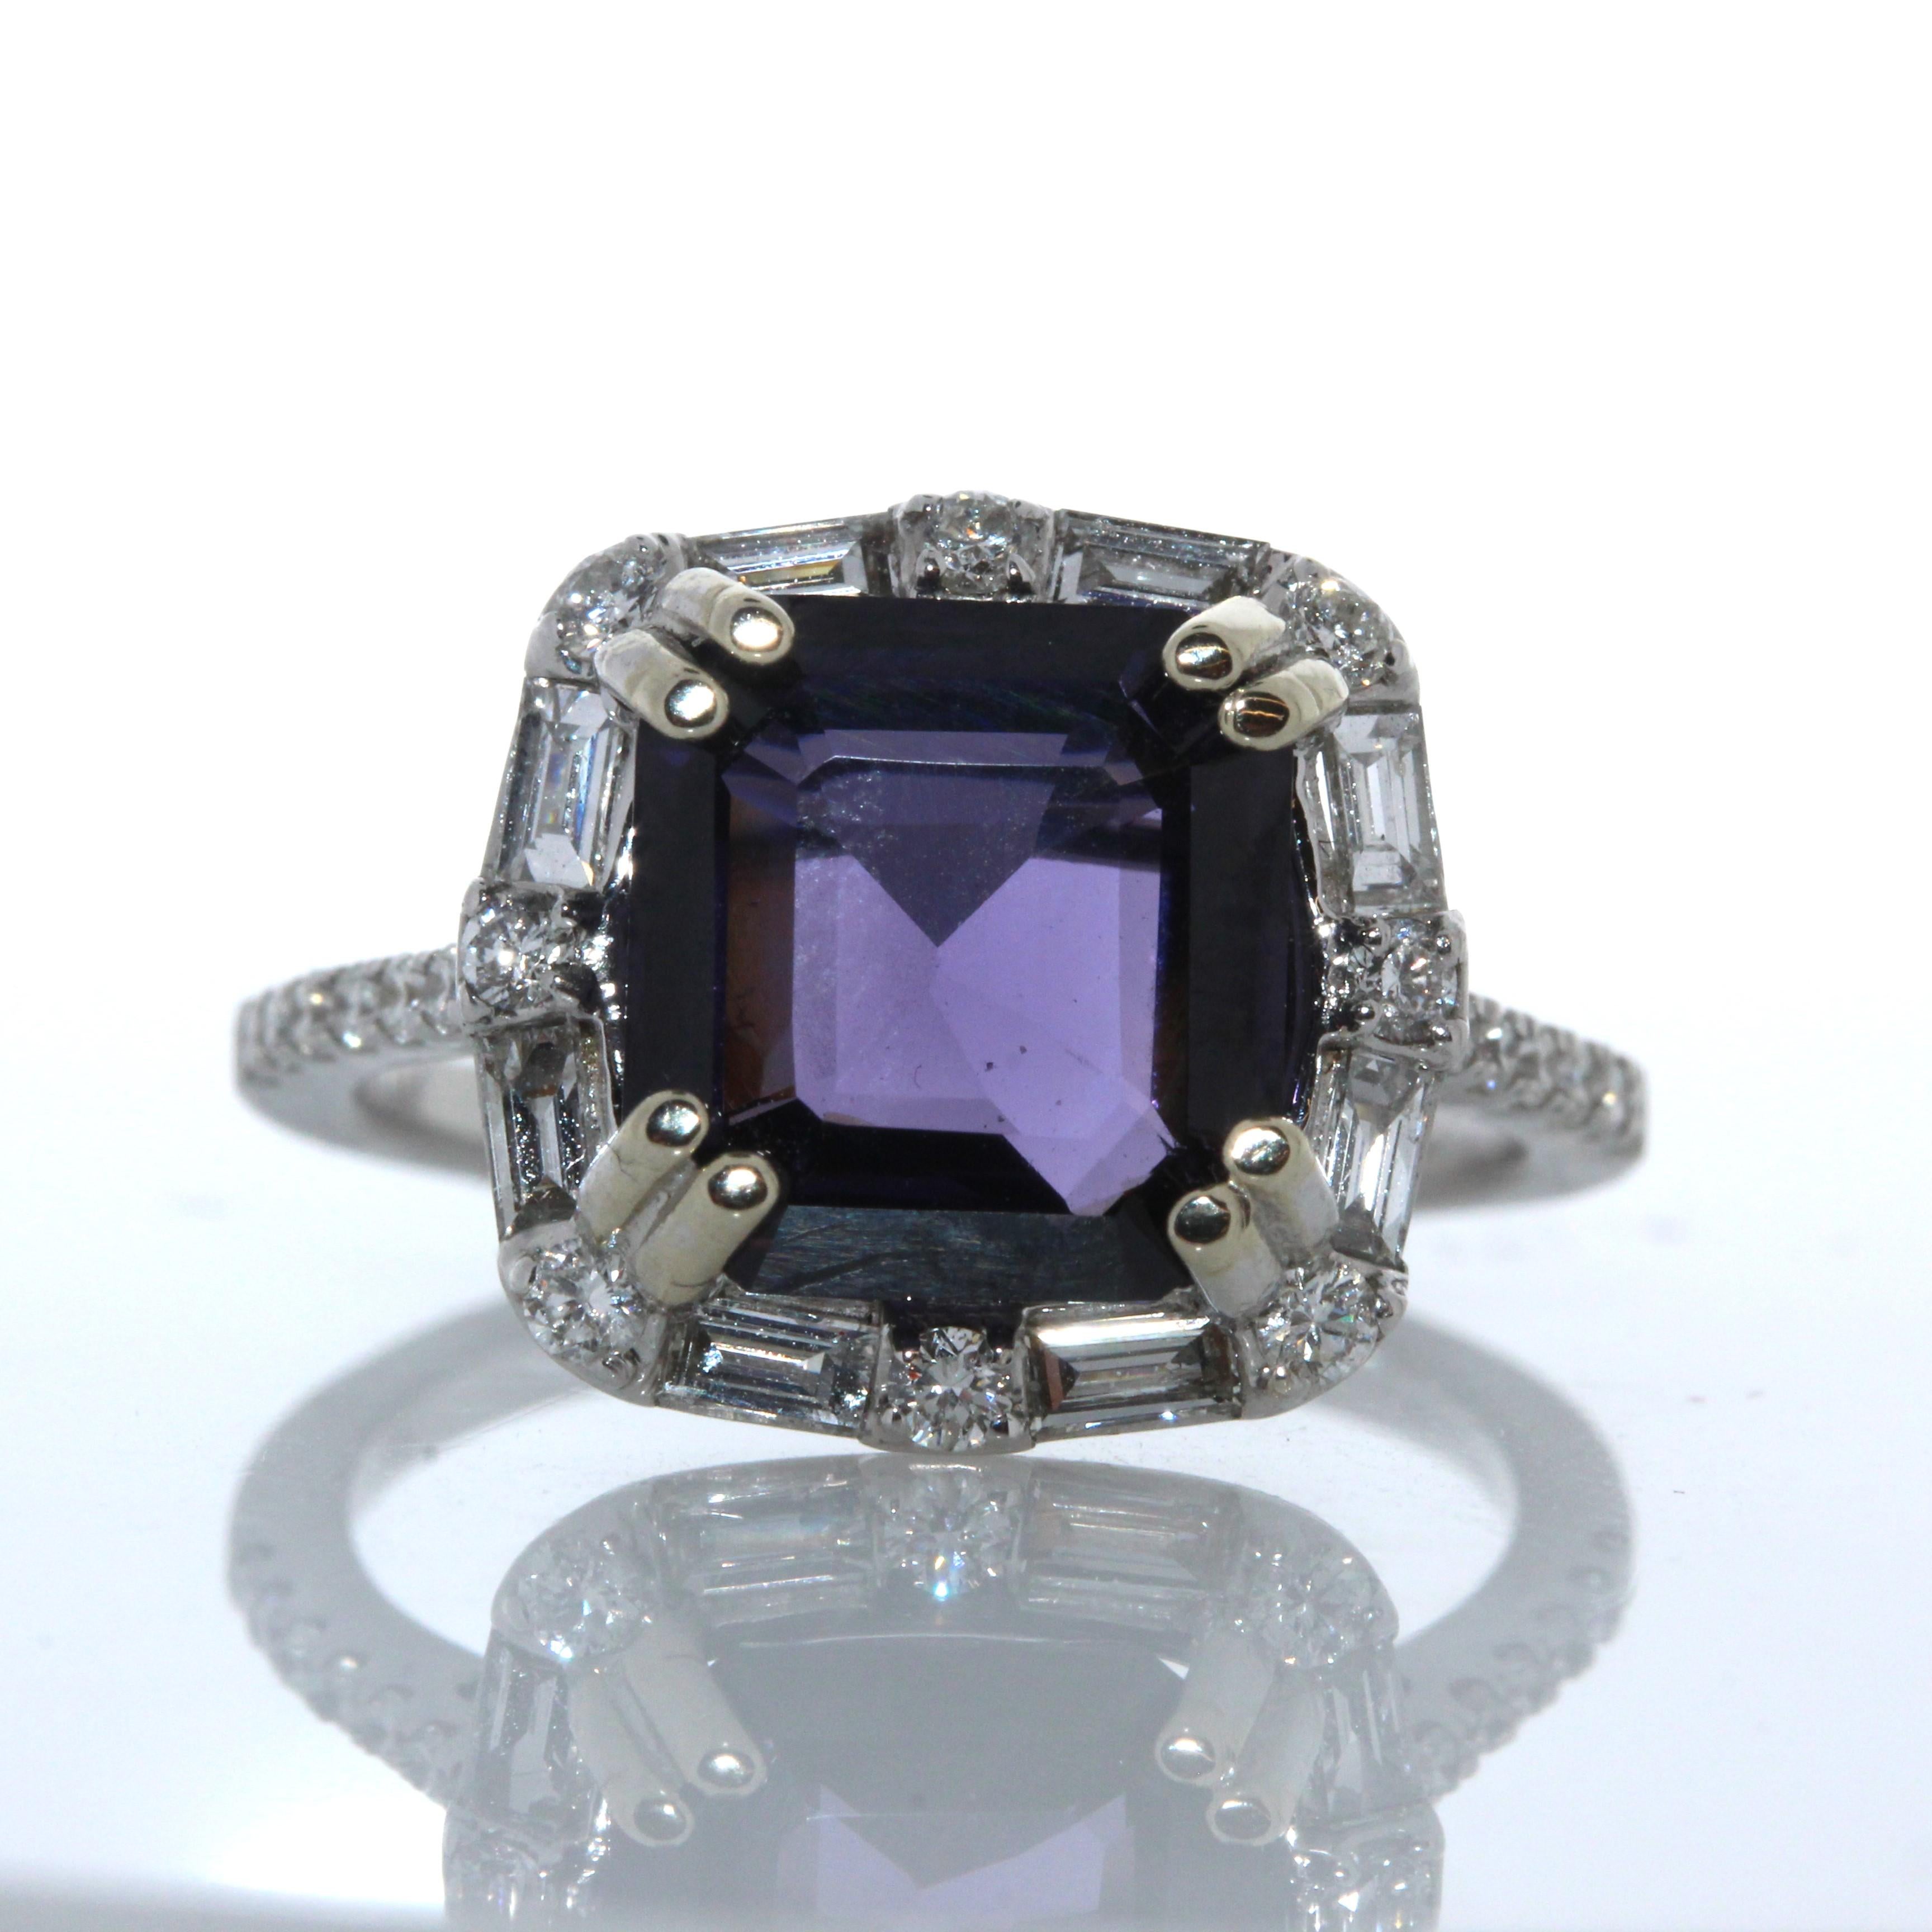 This is a cocktail ring that showcases a white gold, double prong set, 4.45 carat cushion cut purple spinel. The gem source is Sri Lanka; its transparency and luster are excellent. It has diamonds on the band and around the gemstone totaling 0.61